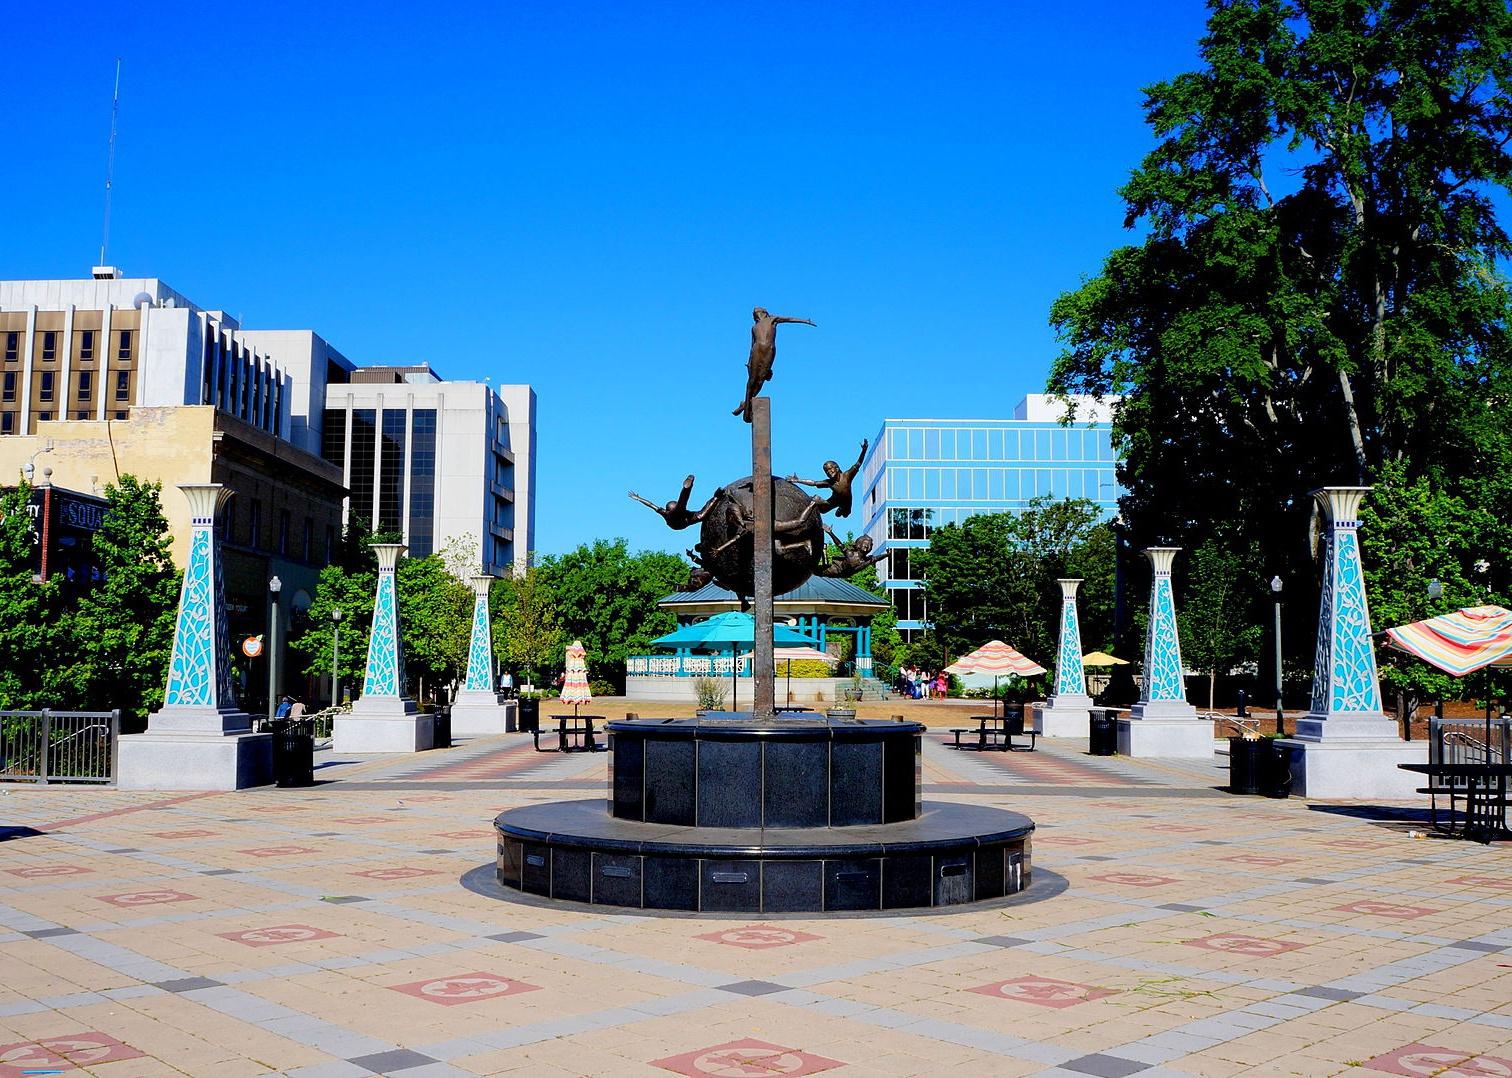 An art statue of people flying centered in a town square surrounded by blue pillars.